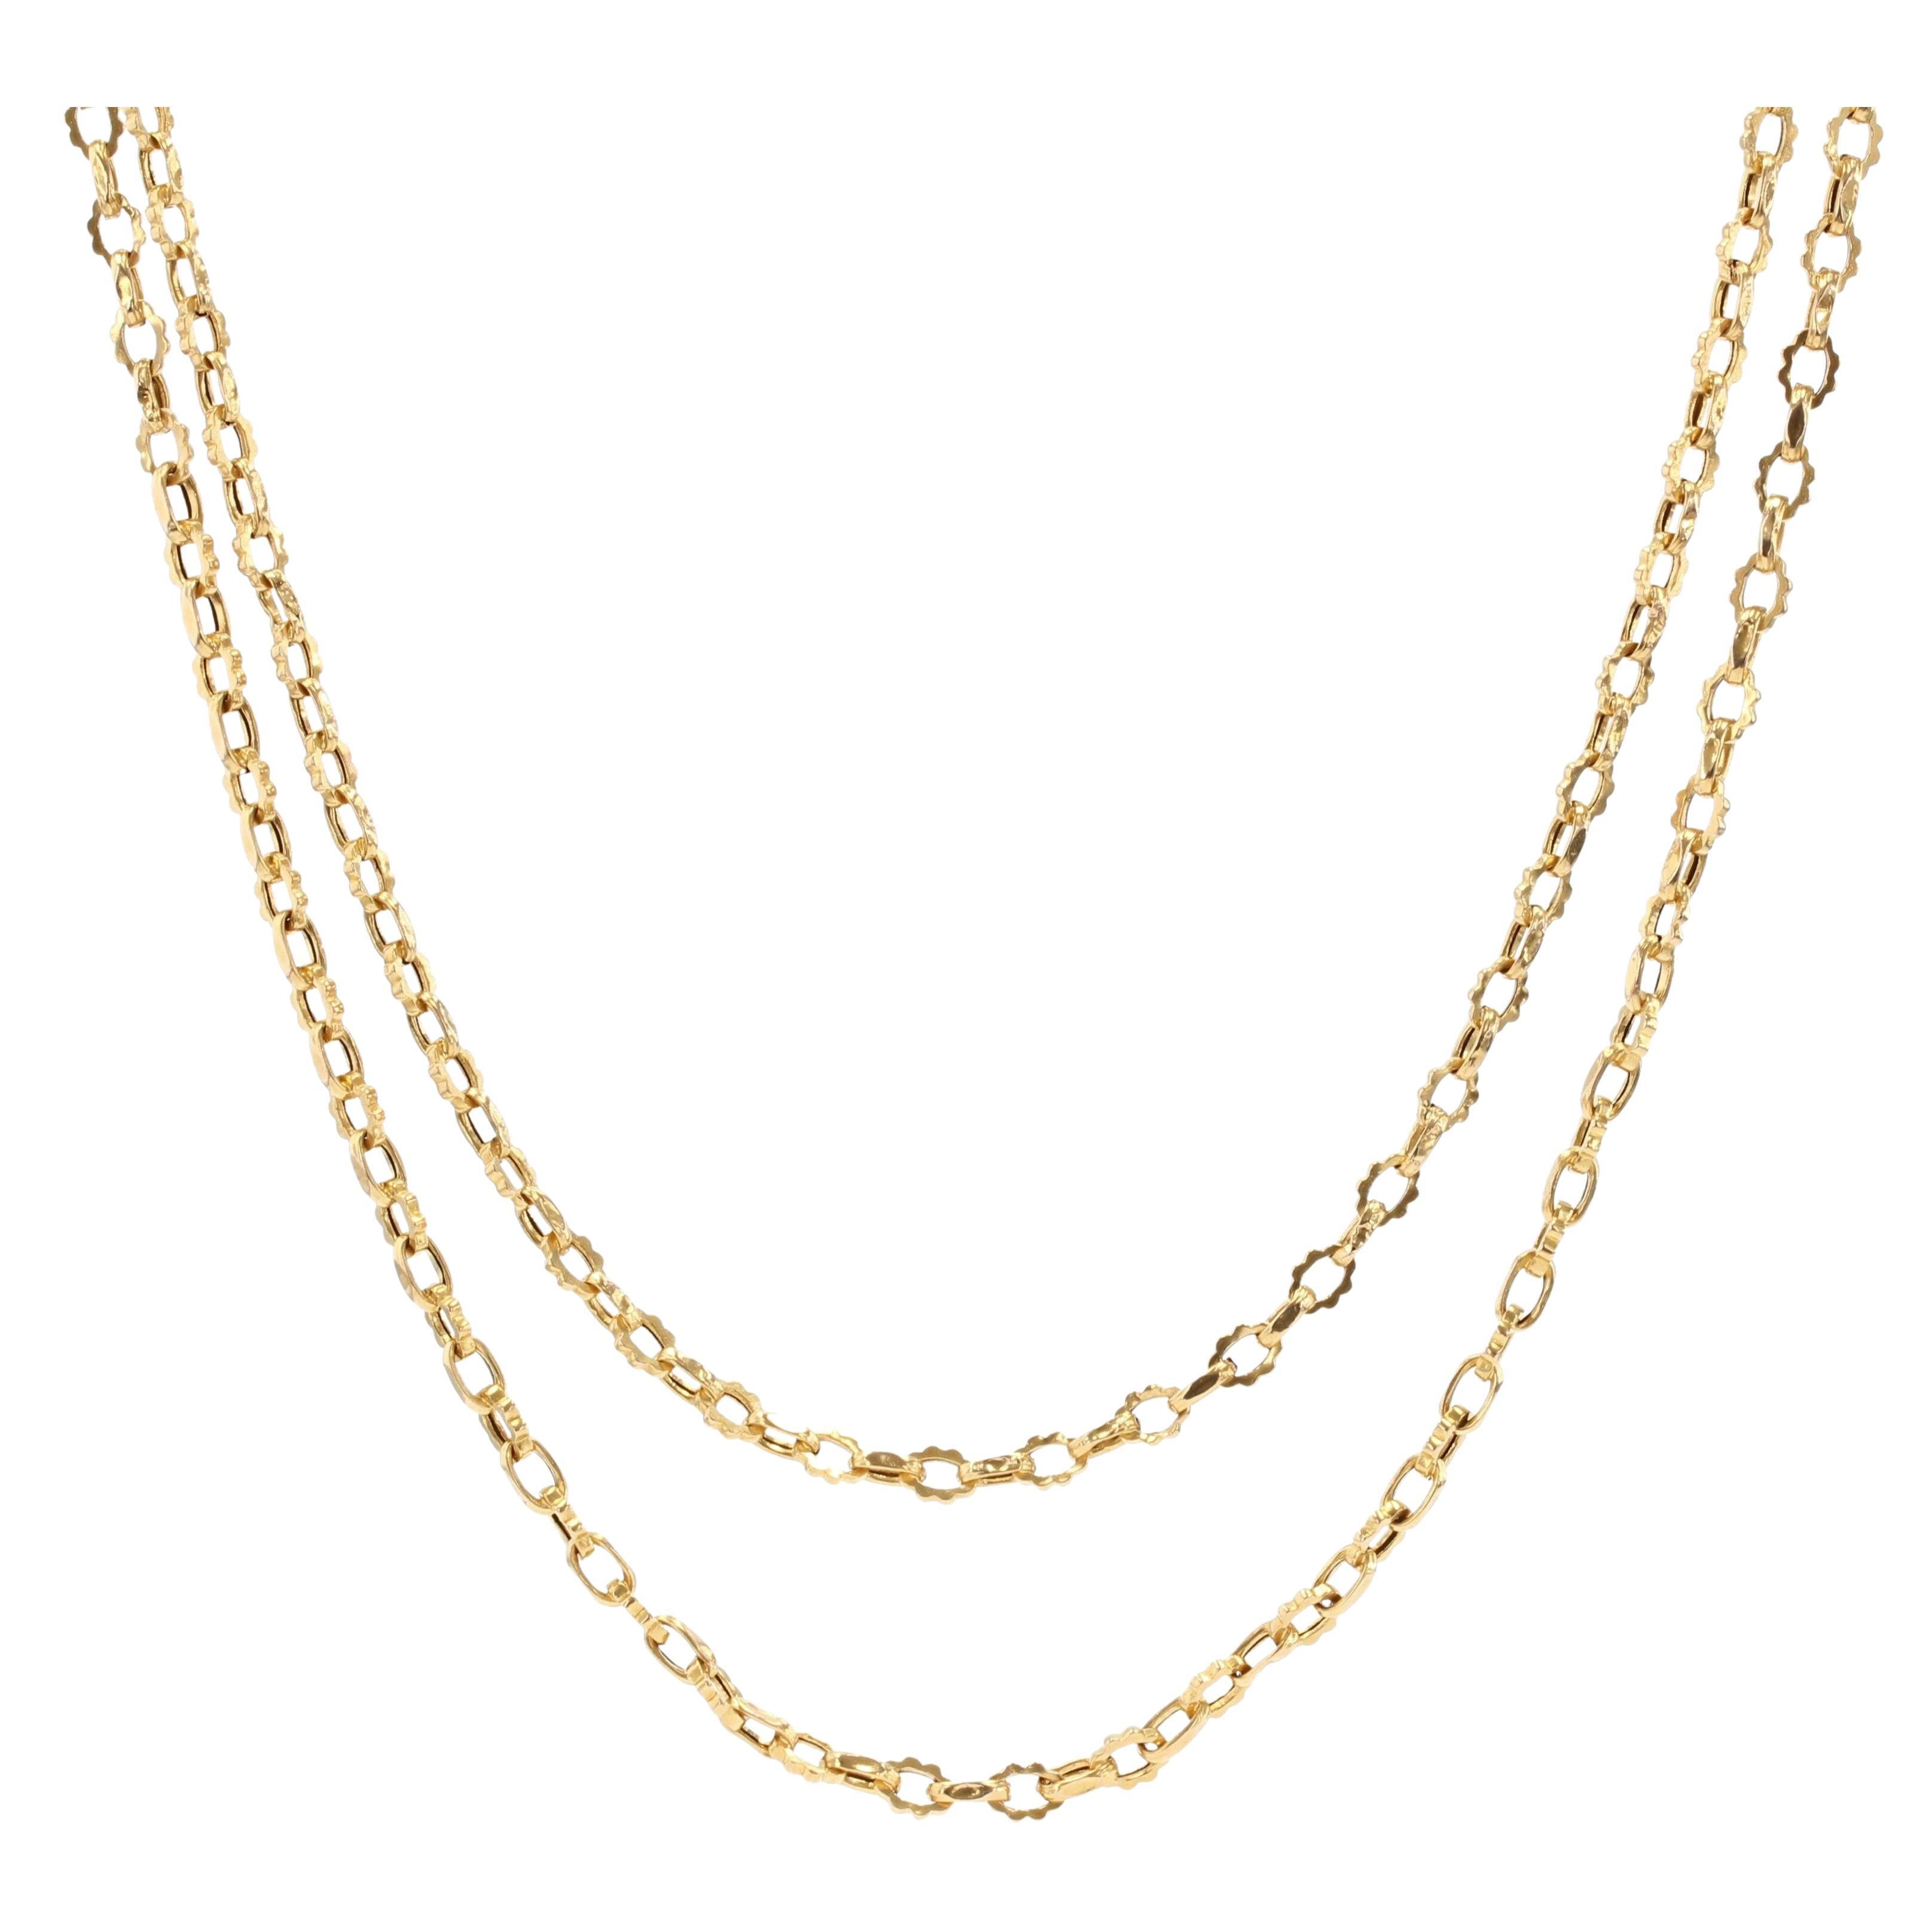 French 1830s 18 Karat Yellow Gold Chiseled Mesh Long Necklace For Sale